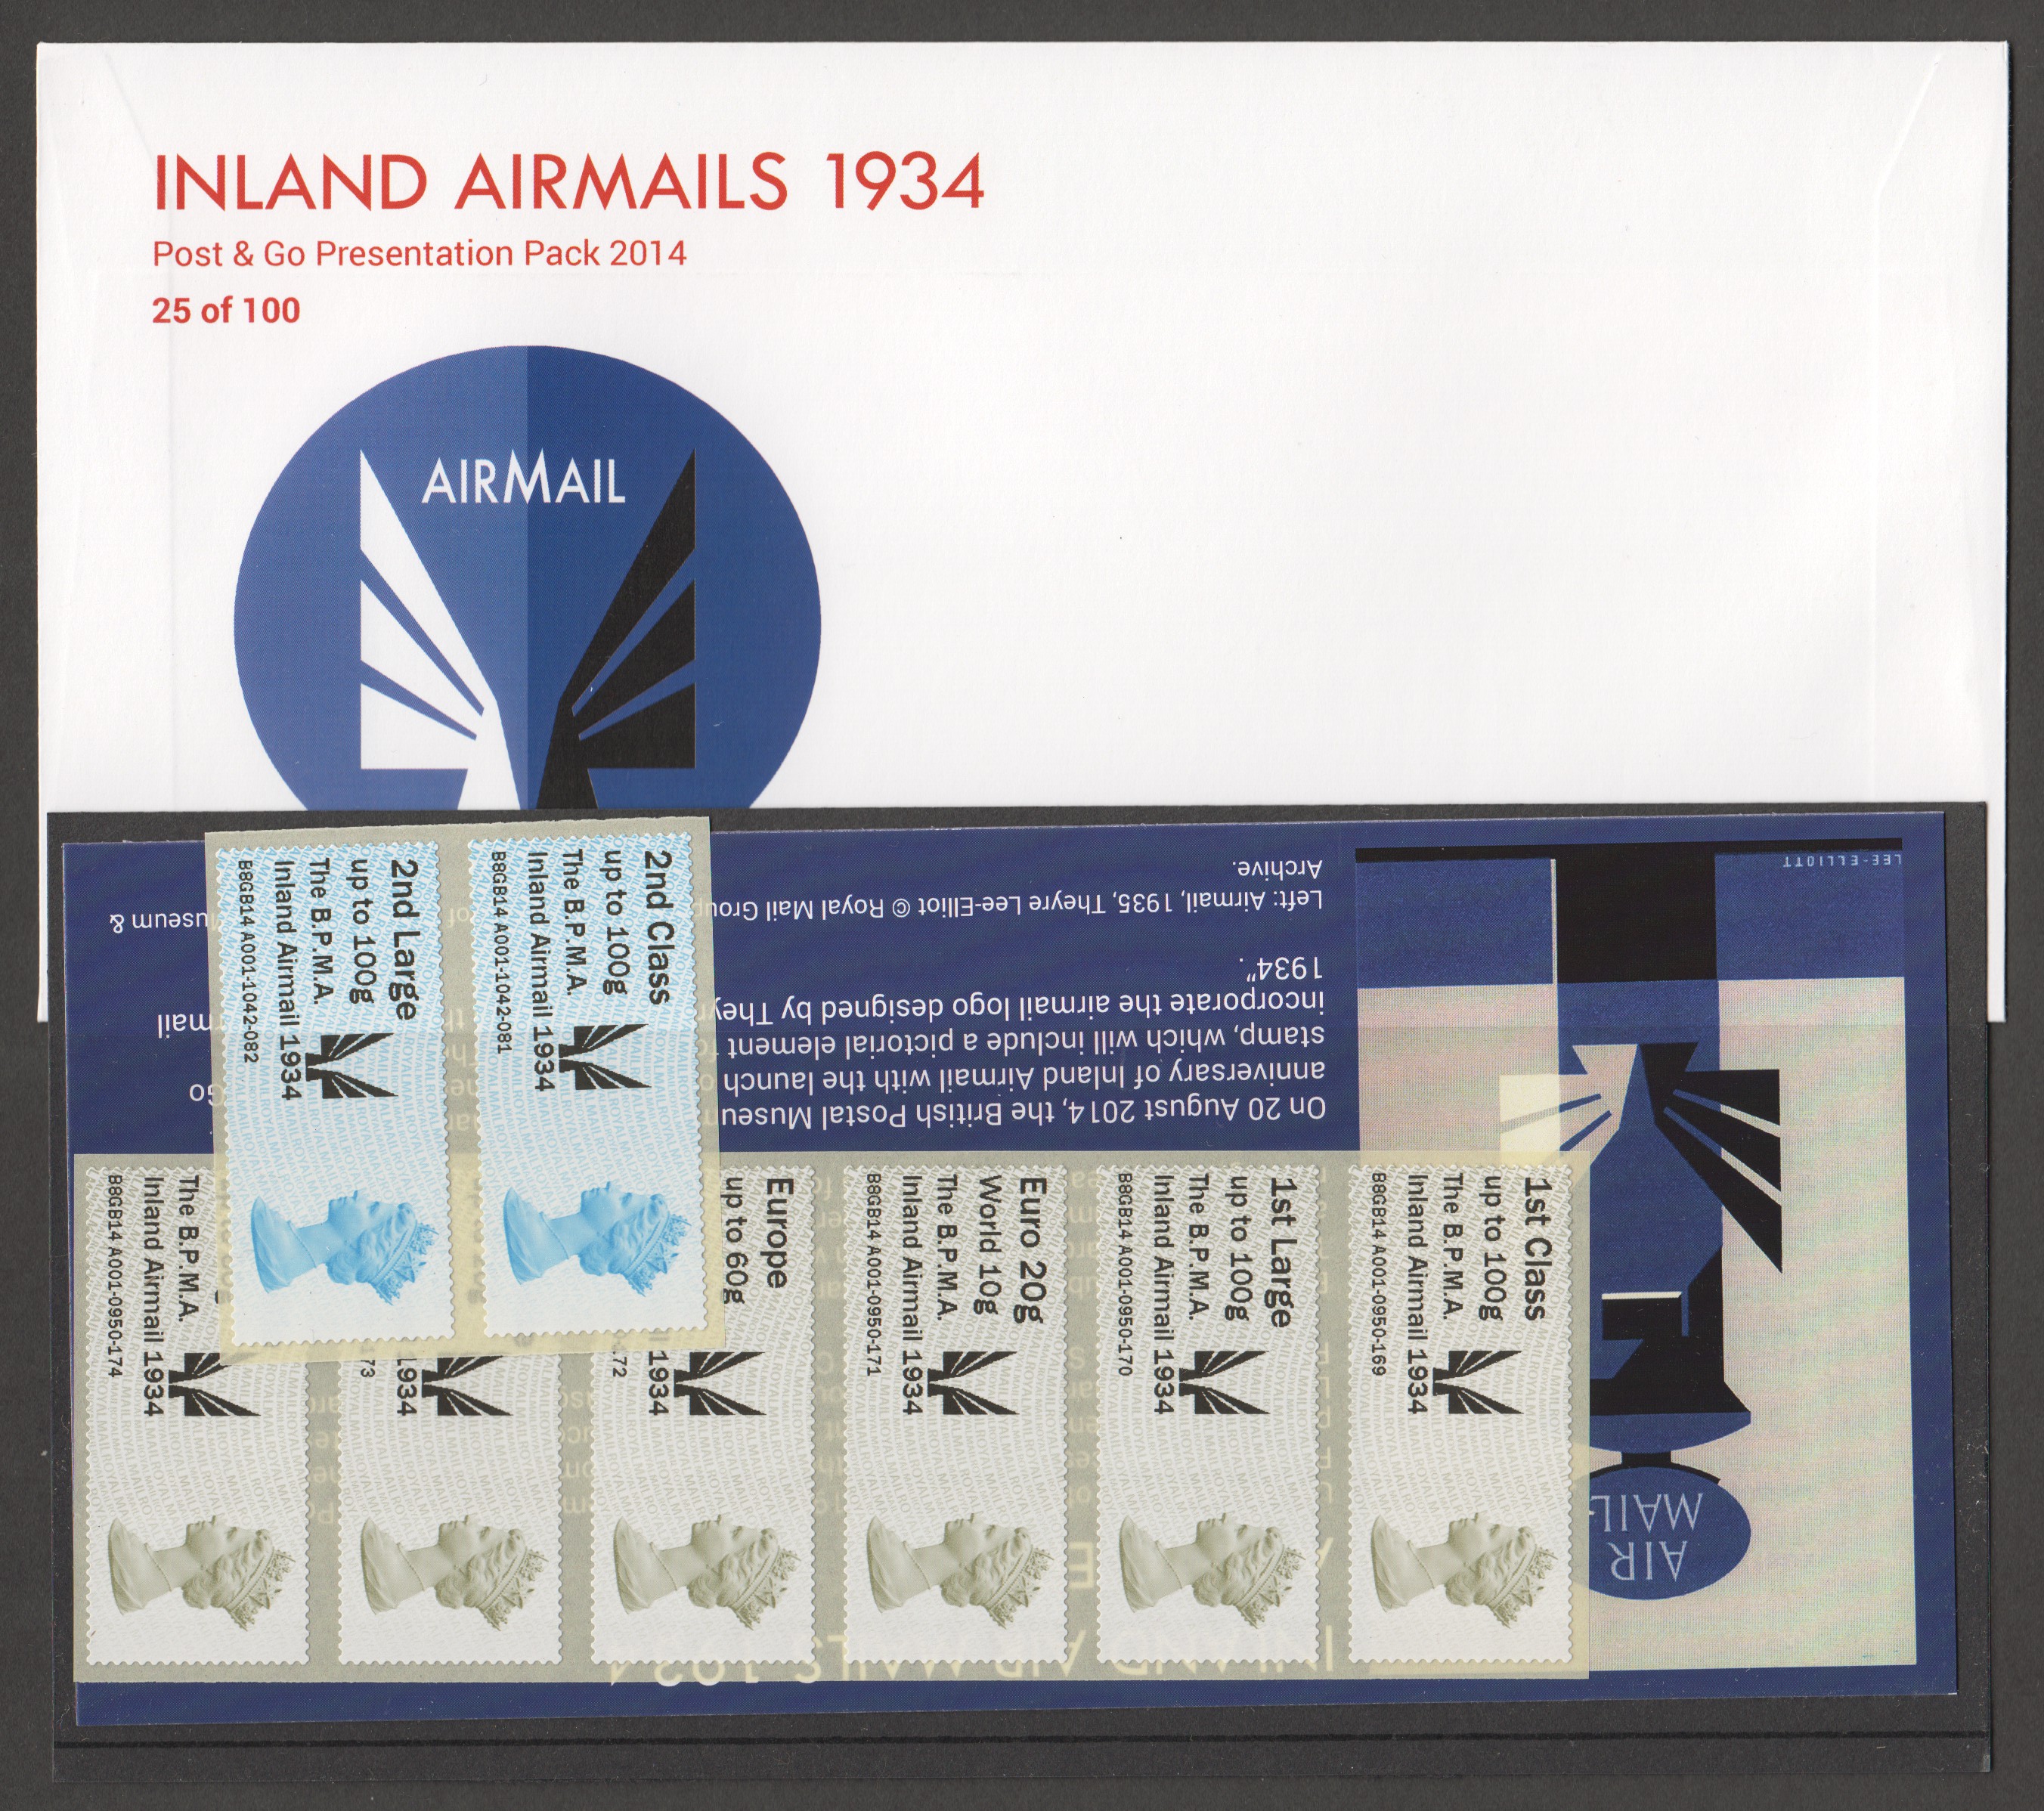 Great Britain 2014 BPMA Inland Airmail 1934 Post & Go Presentation Pack - Click Image to Close